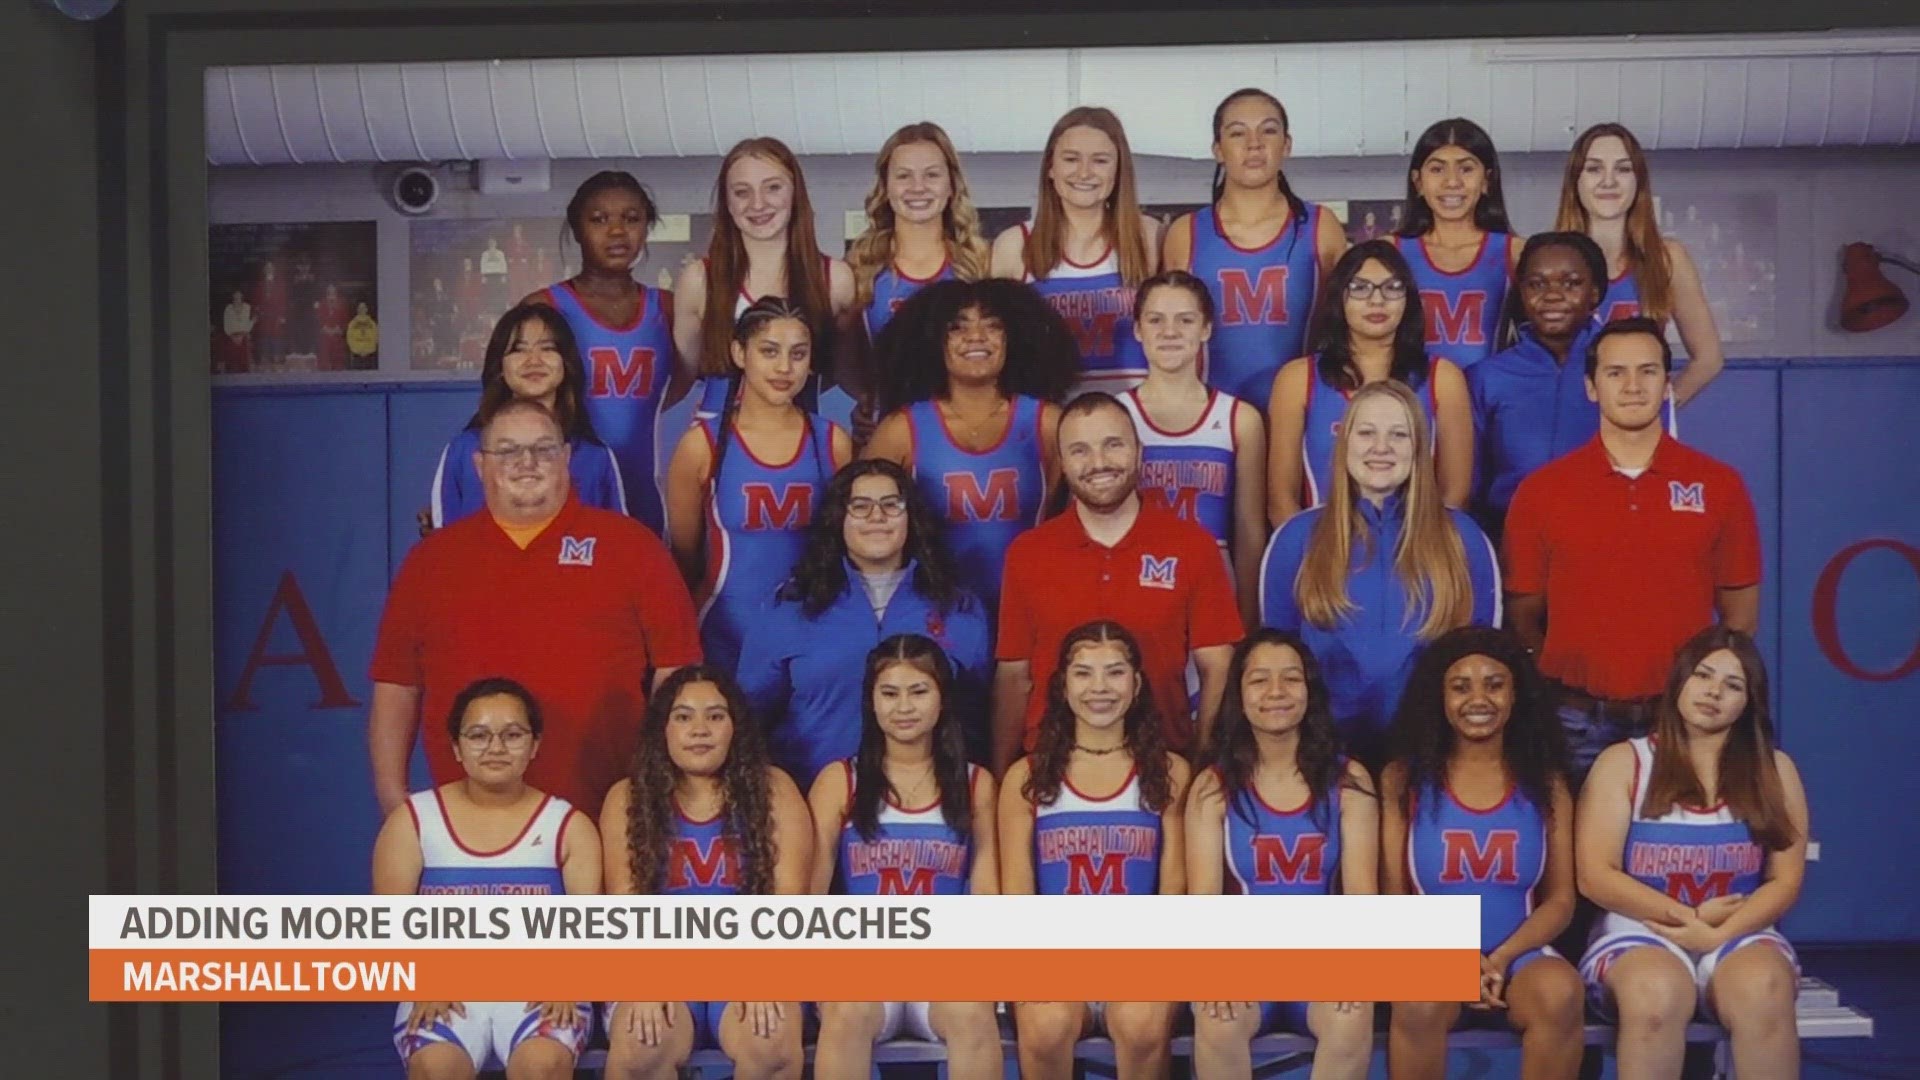 The Associated Press reports girls wrestling is the fastest growing high school sport in the country.